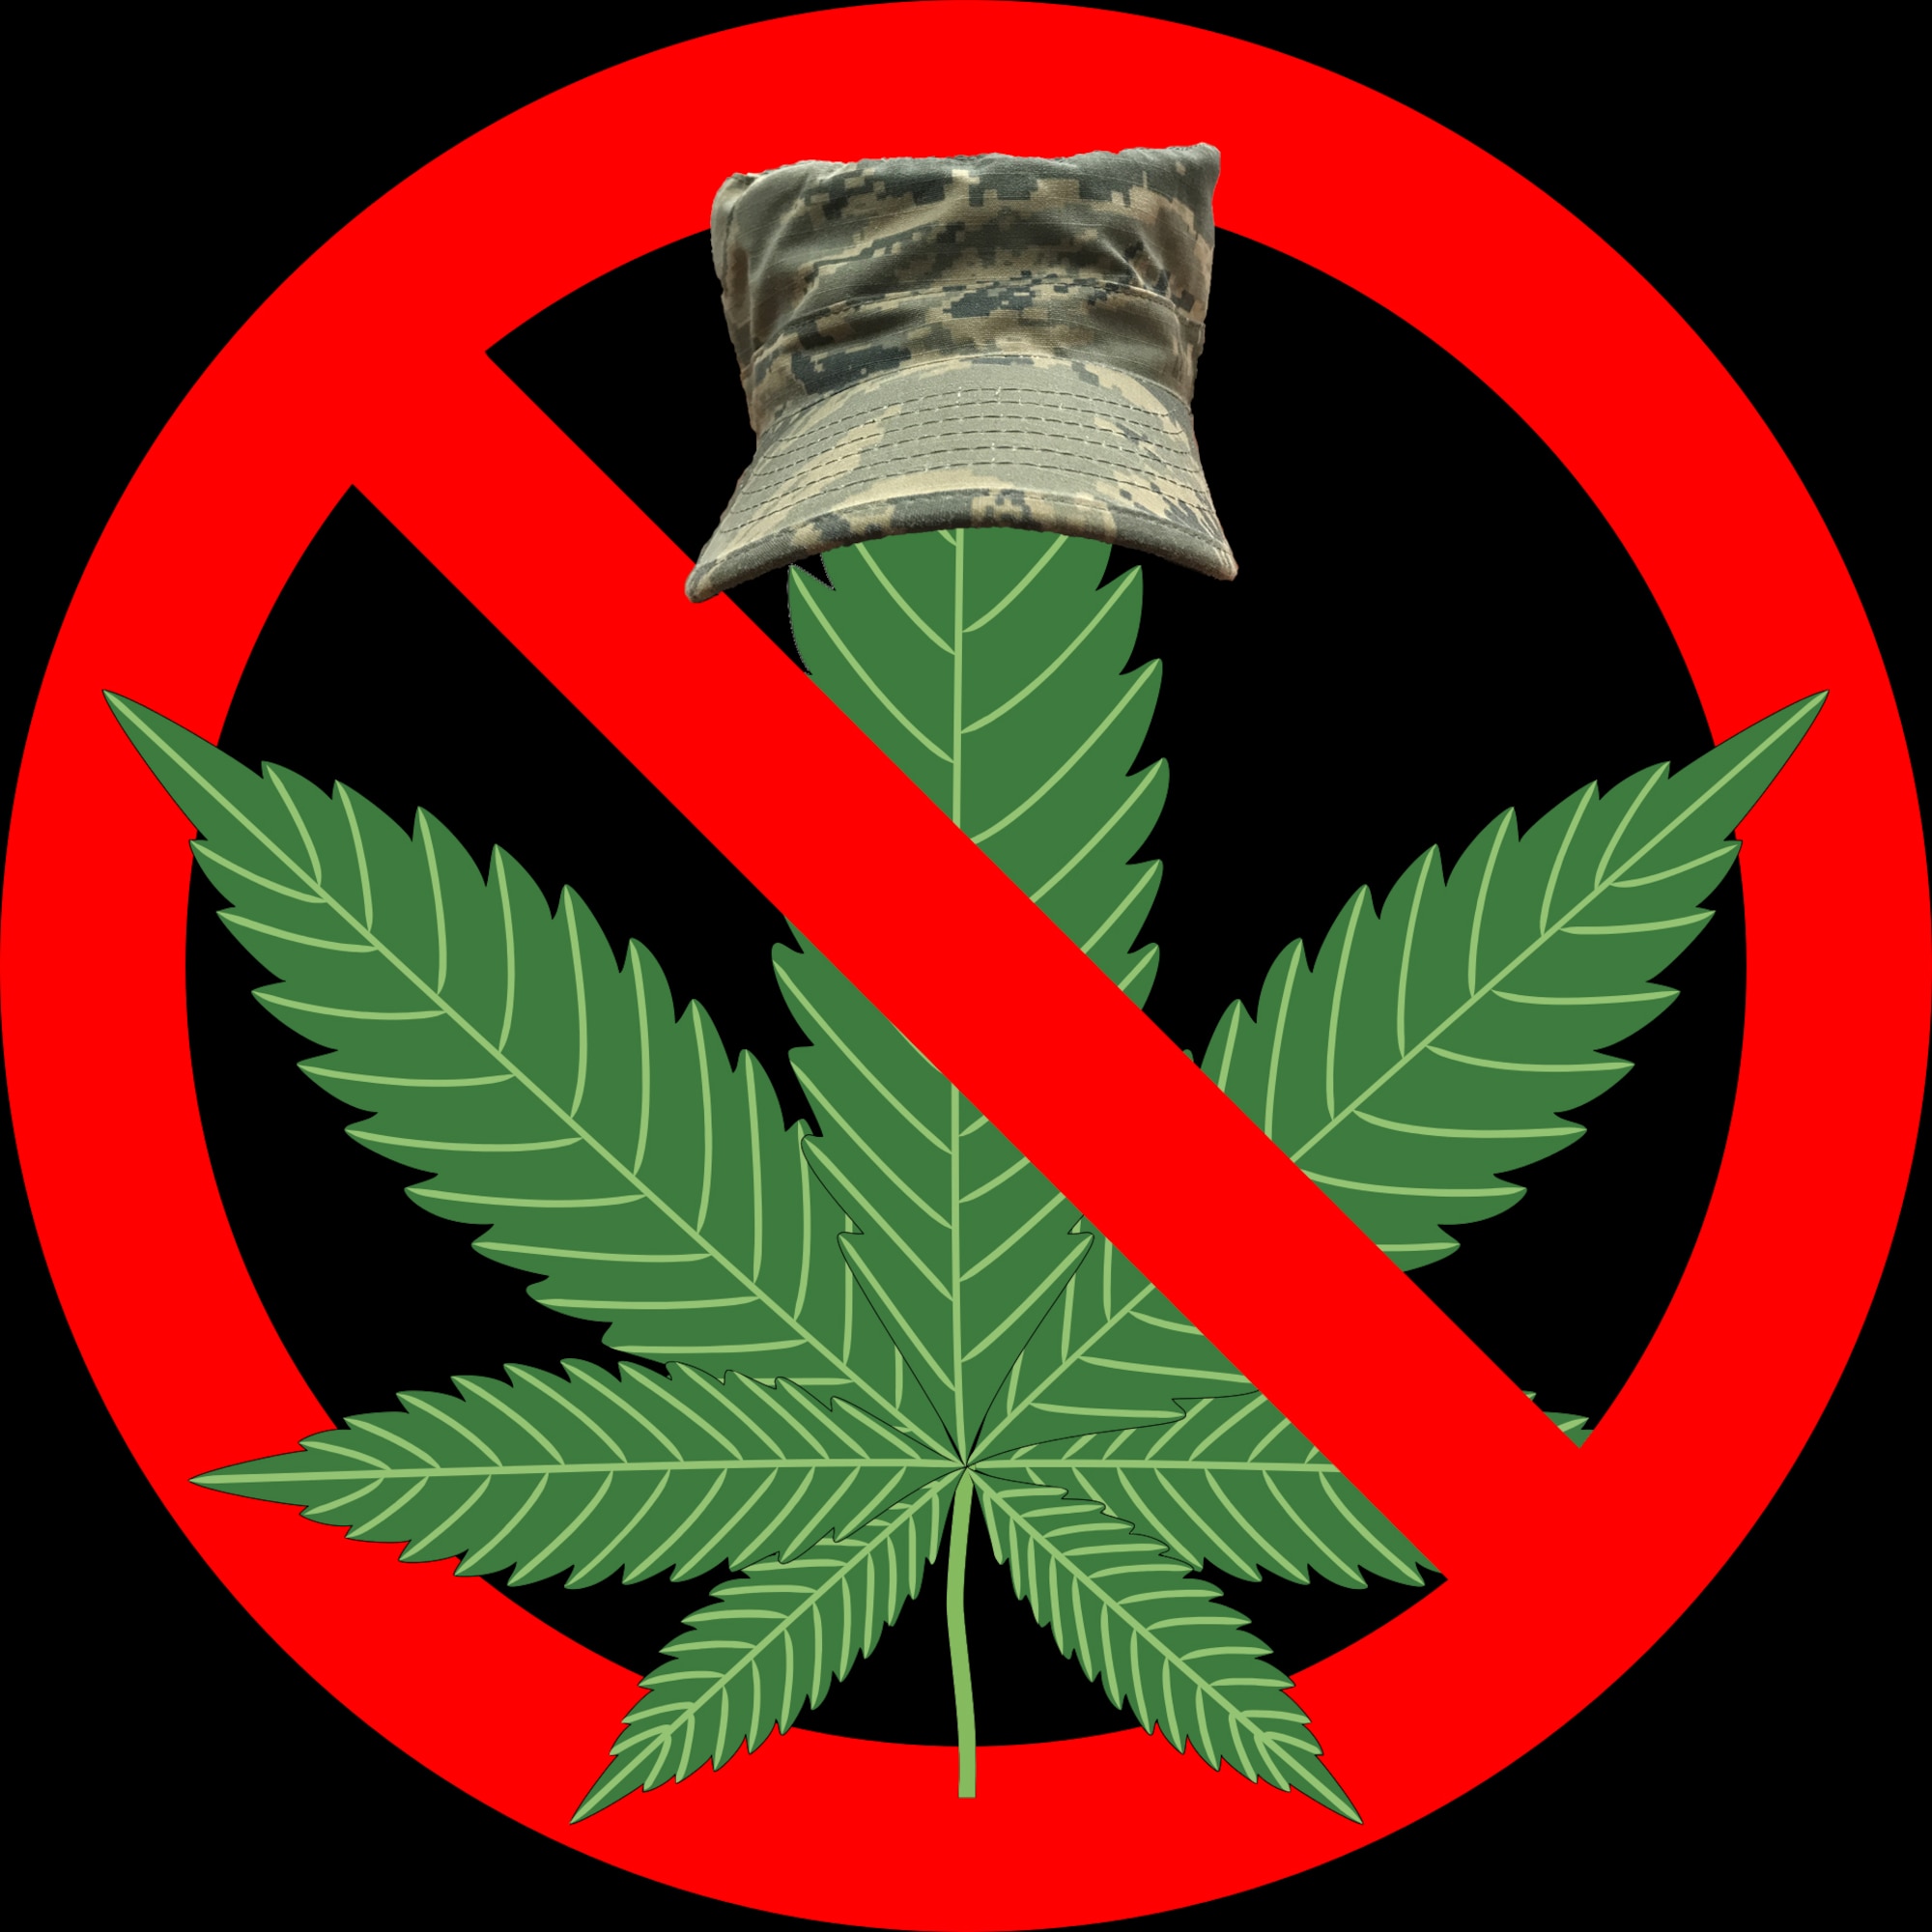 Florida voters approved an amendment to legalize the use of marijuana for medicinal purposes, Nov. 8, 2016. Service members are subject to the Uniform Code of Military Justice and Title 10 of the United States Code, which consider marijuana use or possession to be a crime regardless of state laws. (U.S. Air Force graphic by Staff Sgt. Jeff Parkinson)